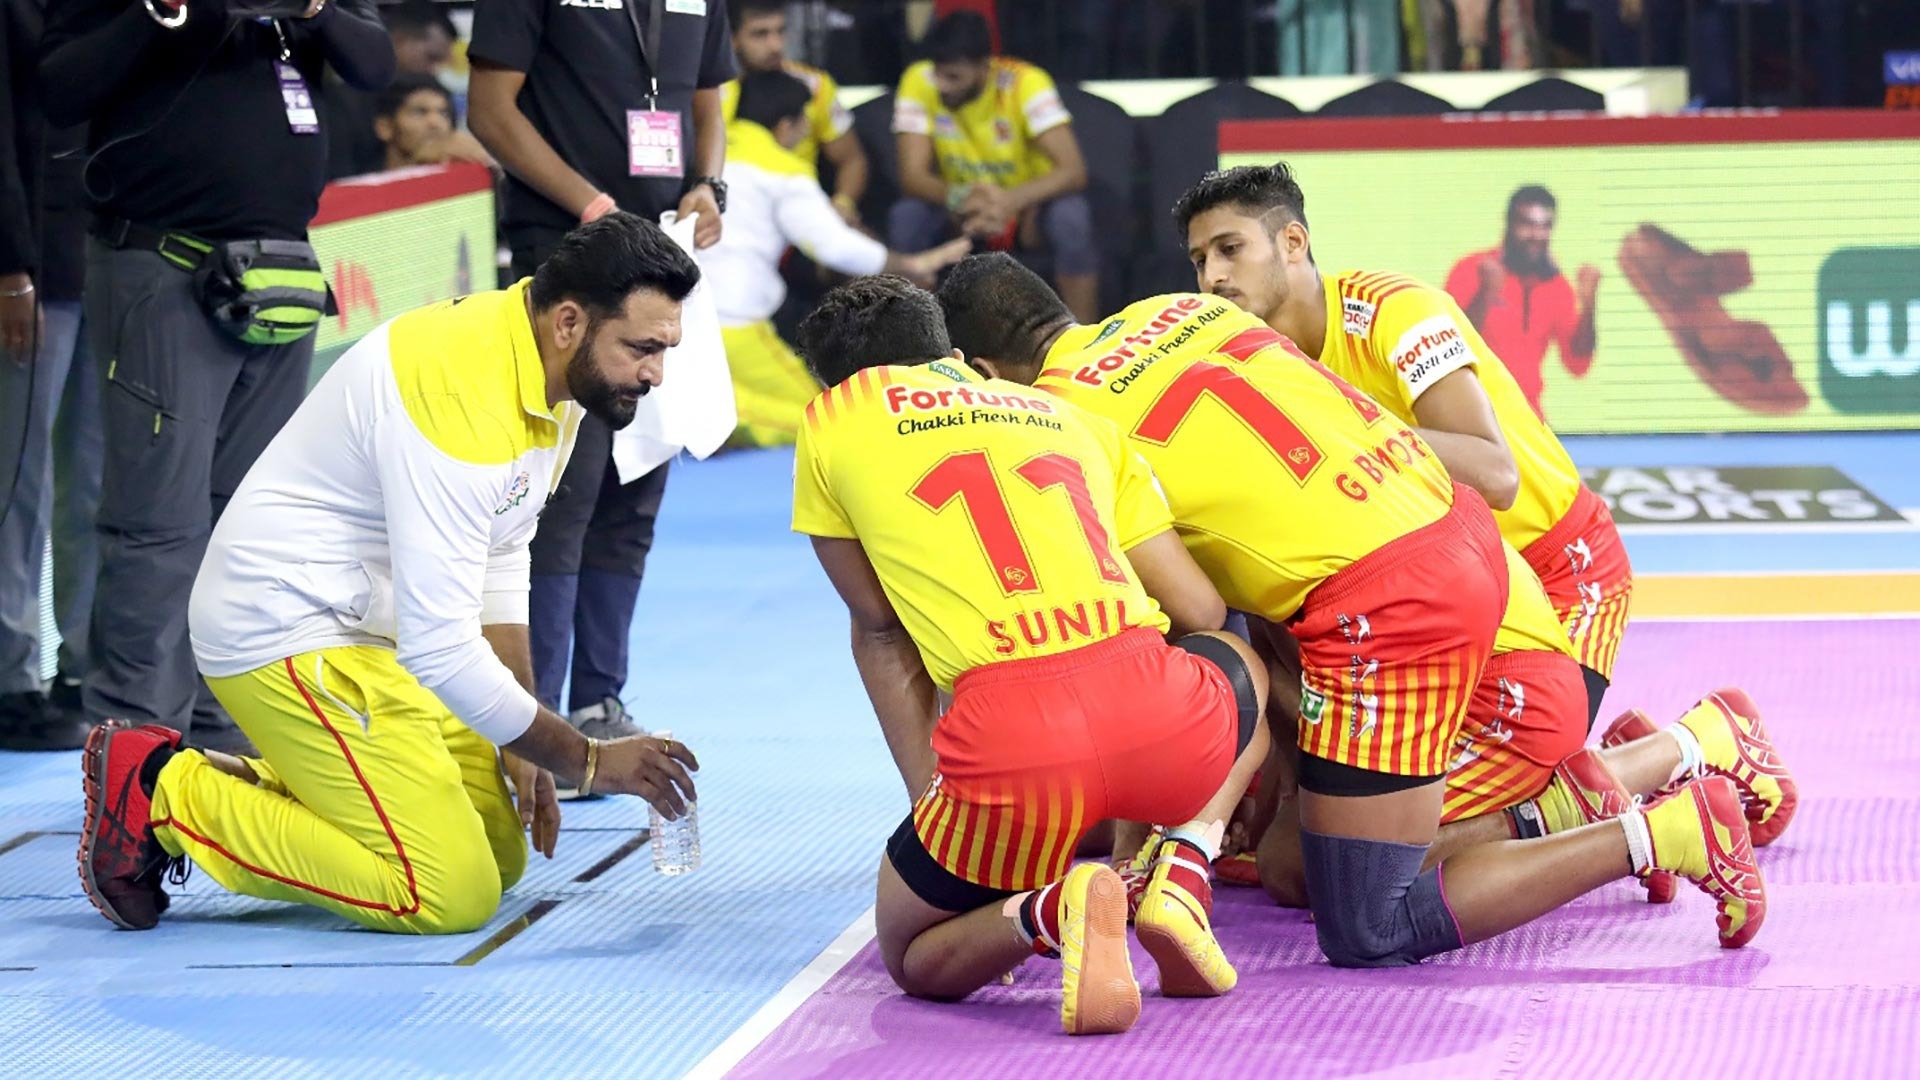 PKL 2019 | Kabaddi is a game where there is no scope for going wrong, says Manpreet Singh